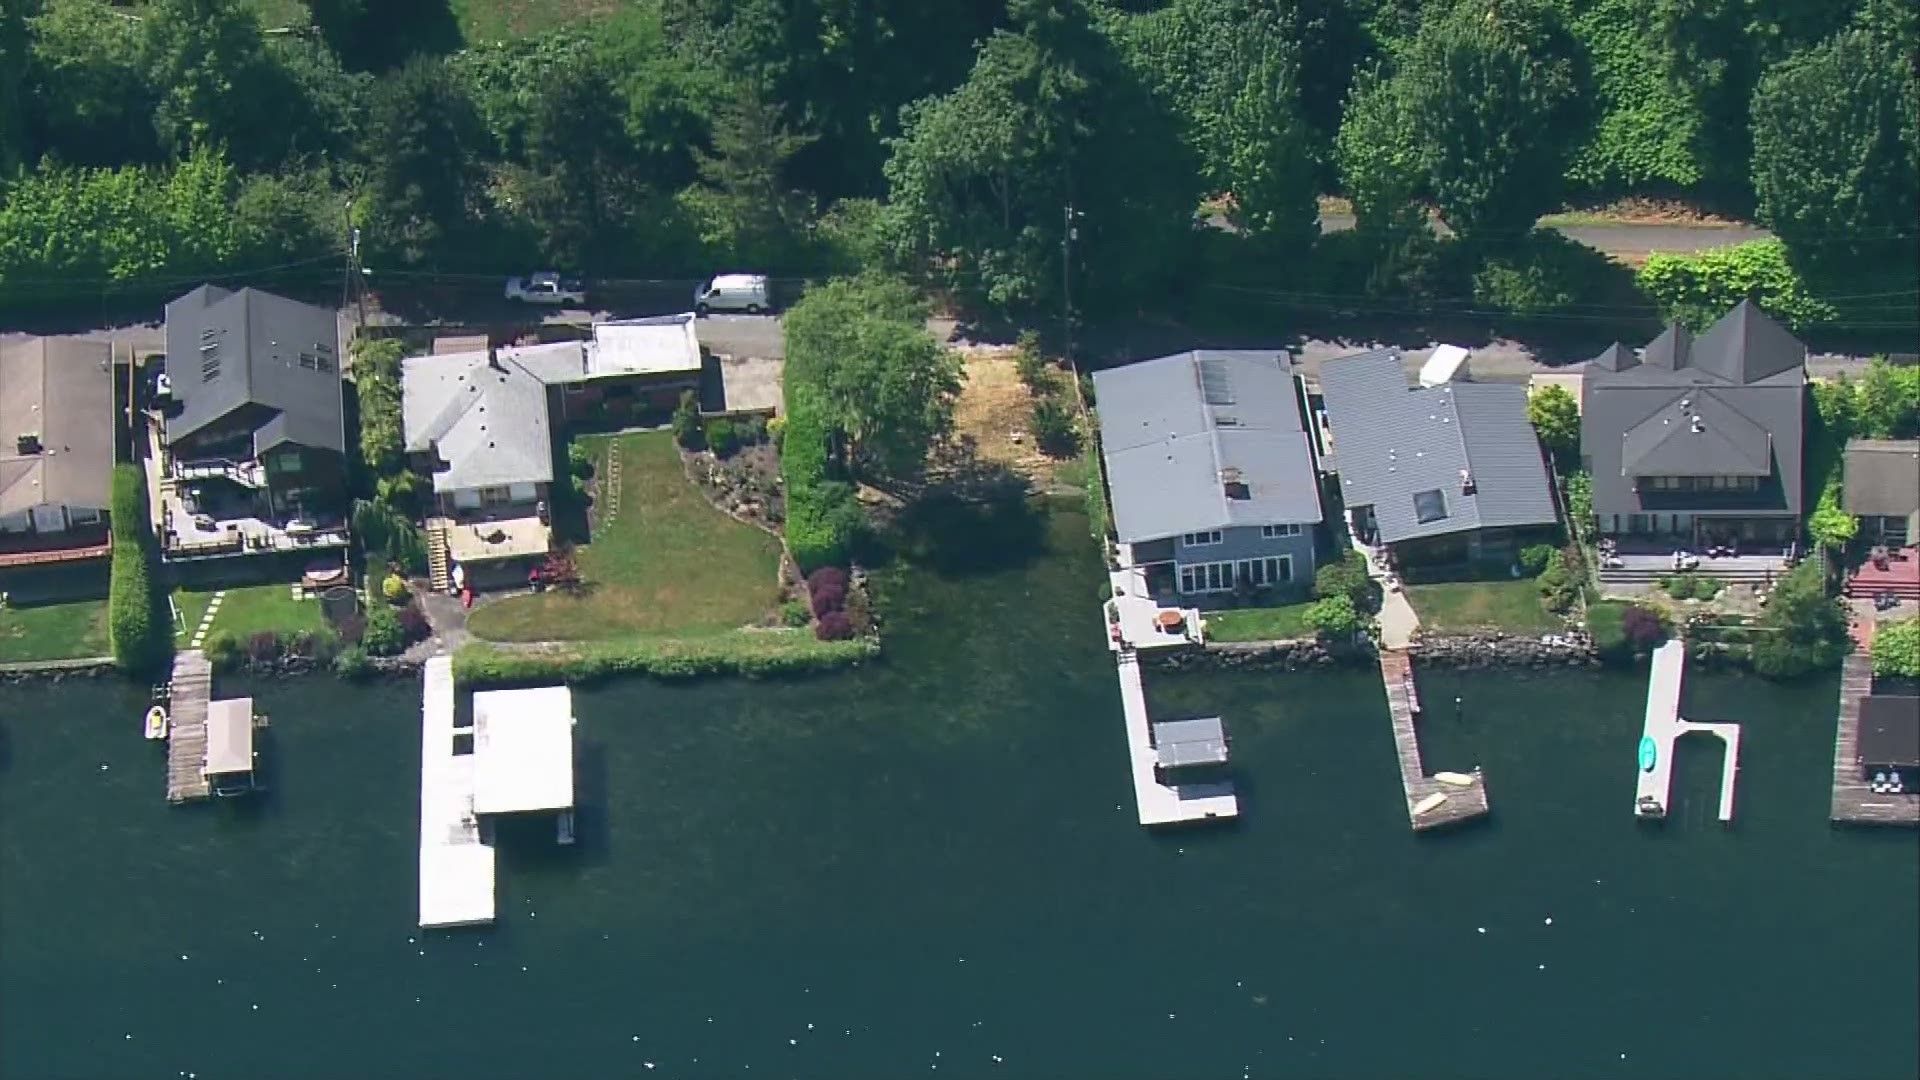 The public can now access a 13,736 square-foot waterfront property on Lake Washington near Lake City.